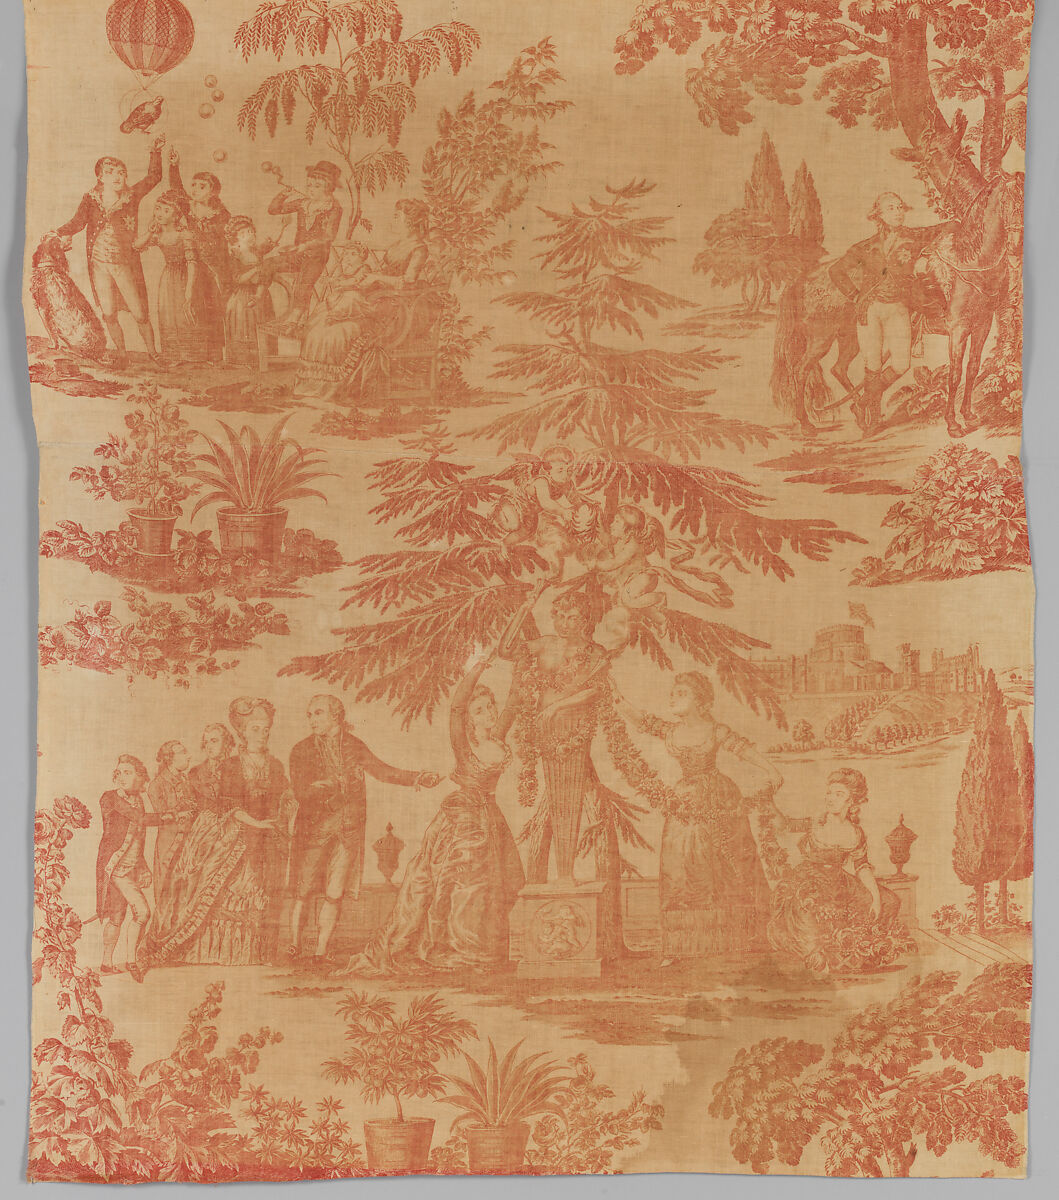 Copper plate printed cotton with King George III and his family, After engravings by J. Seymour  , published London, 1779, Cotton, British 